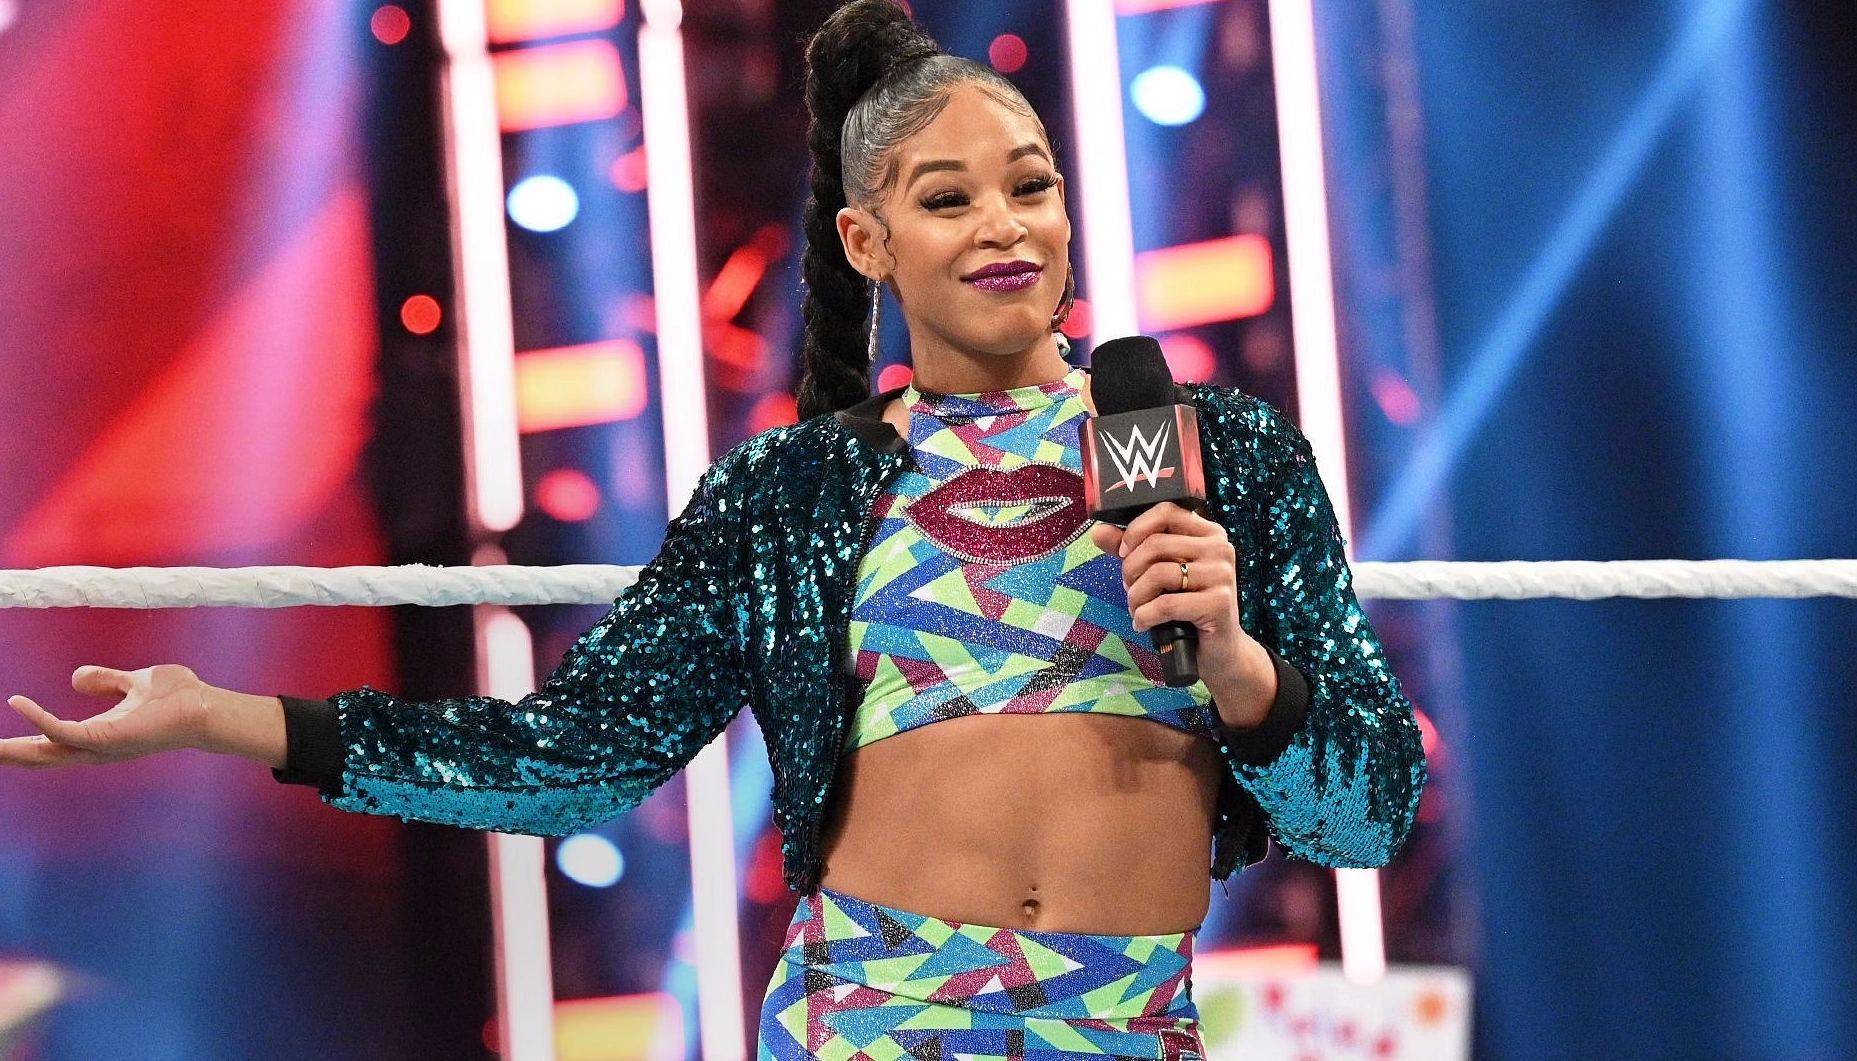 Bianca Belair Scheduled to Make an Appearance at ‘WWE World’ in the Upcoming Month